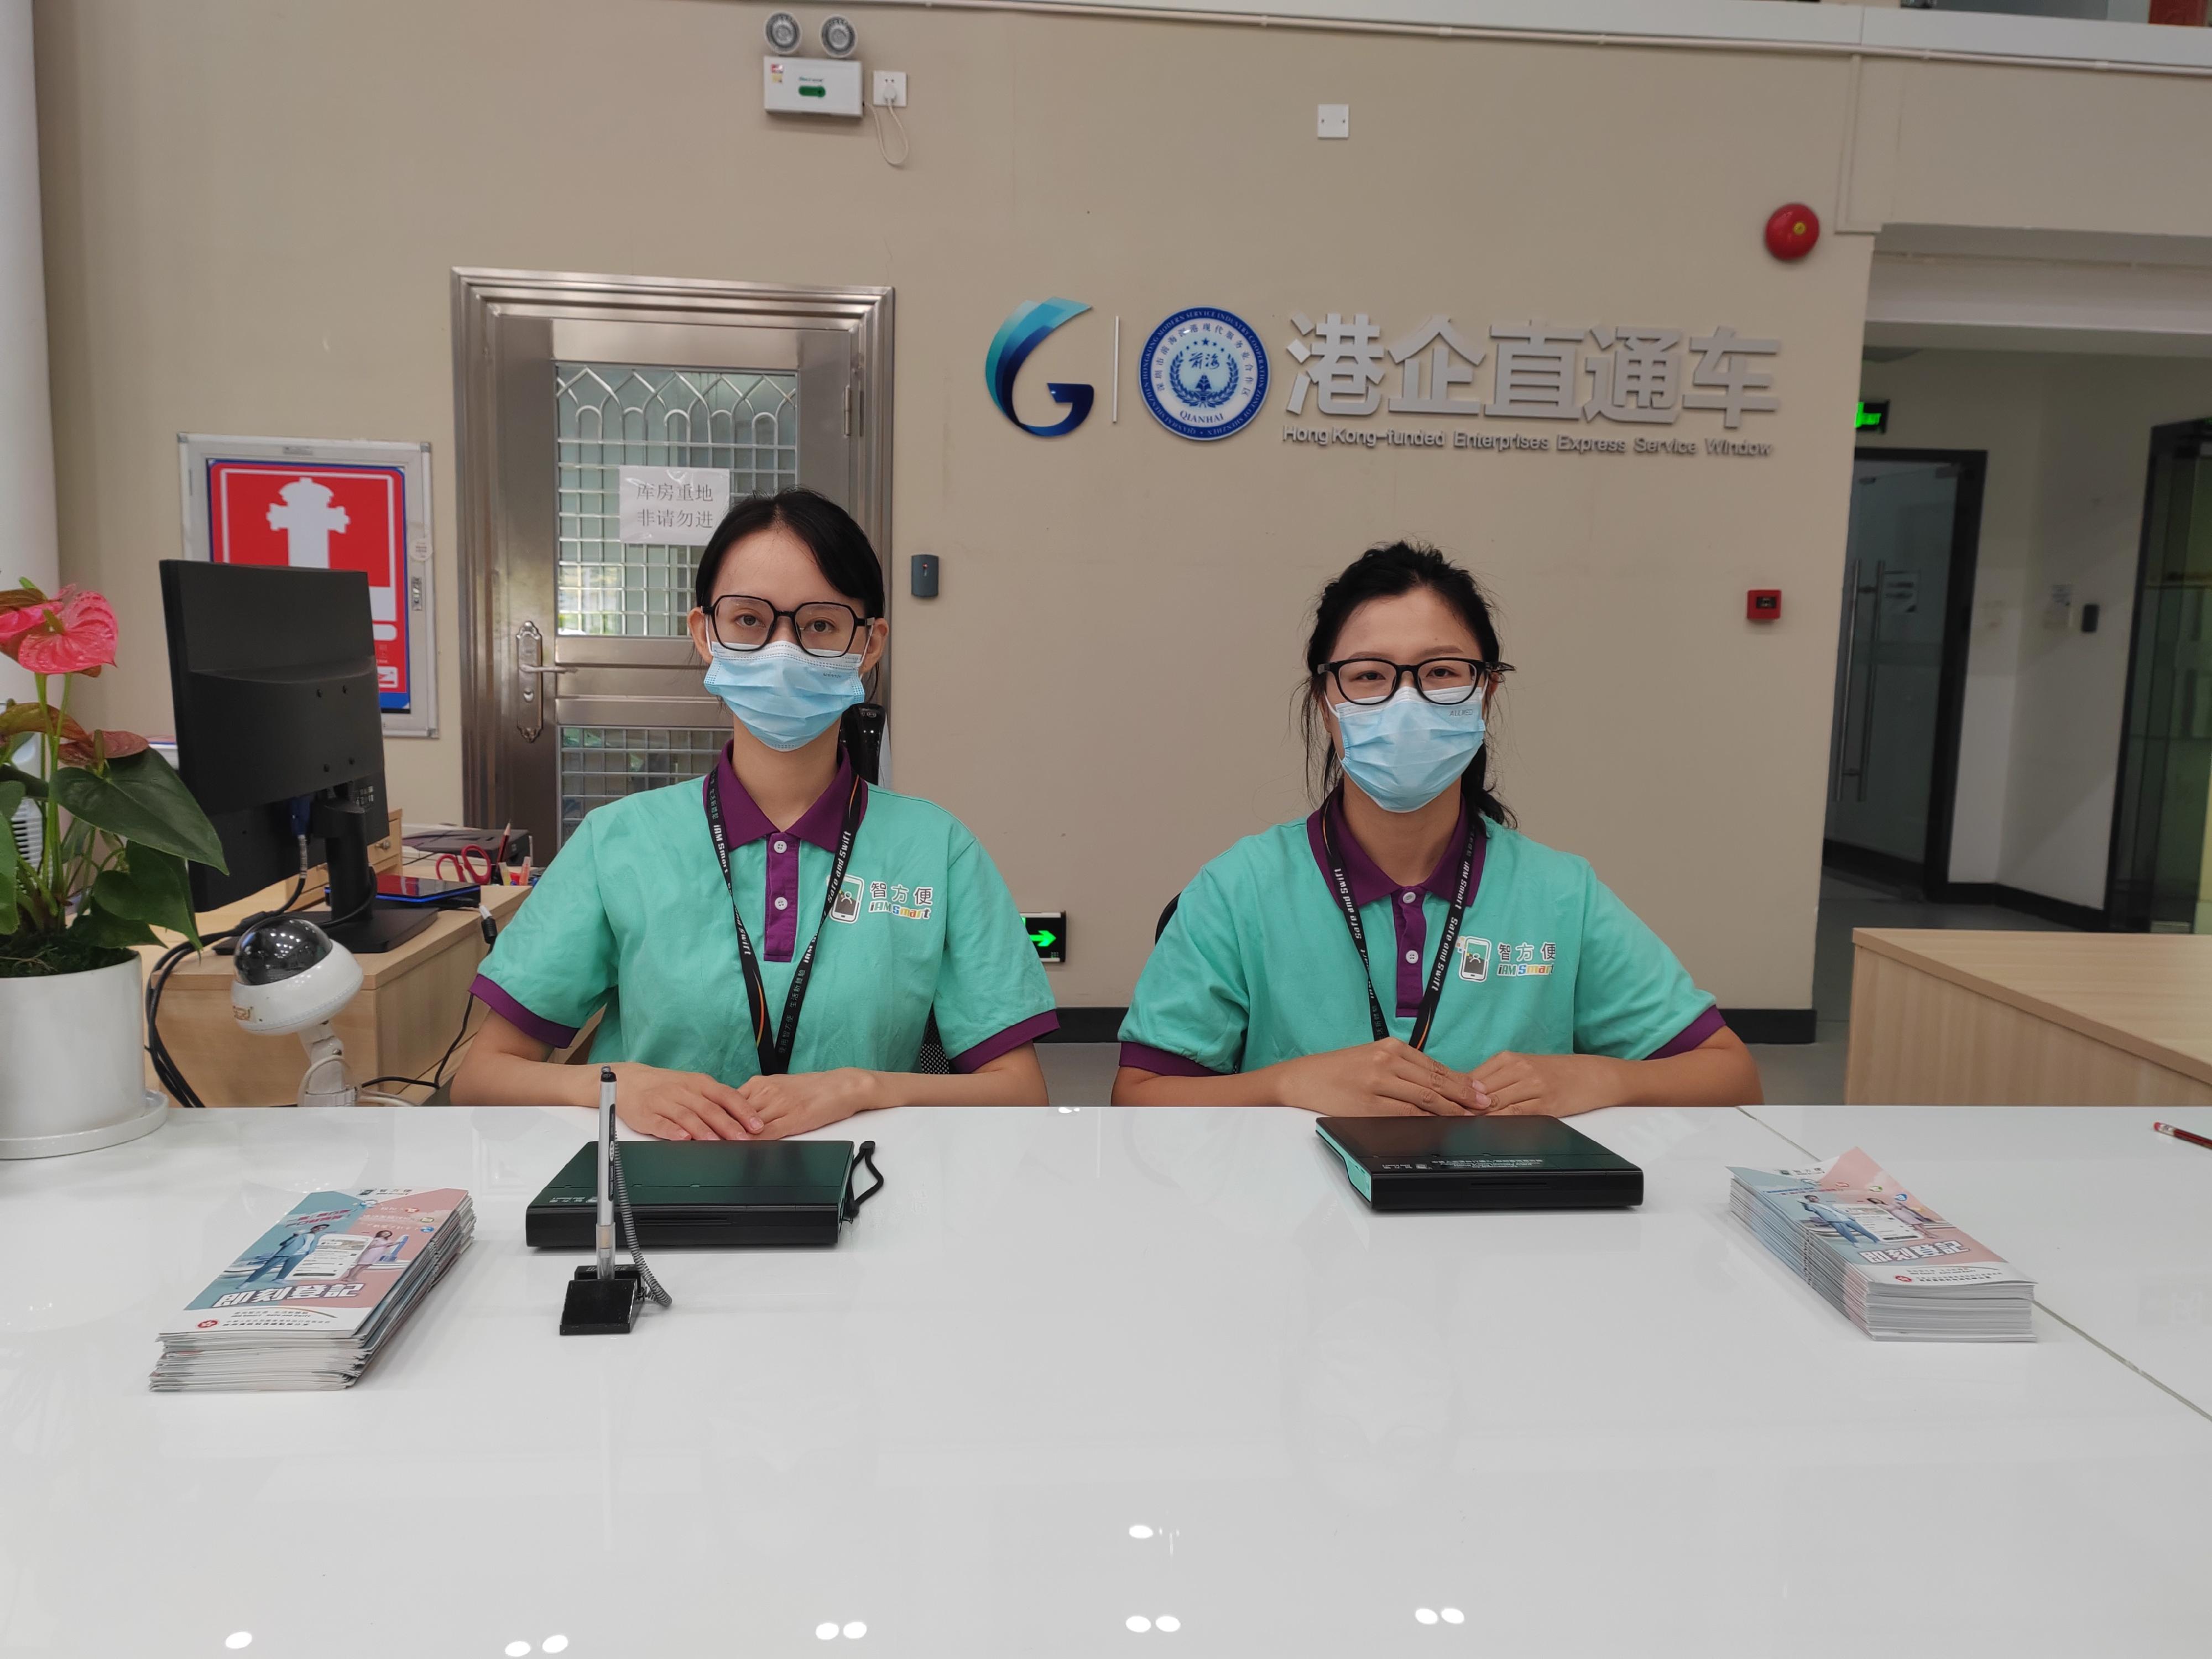 The "iAM Smart" registration service counter set up by the Office of the Government Chief Information Officer at Qianhai, Shenzhen, is now in service.